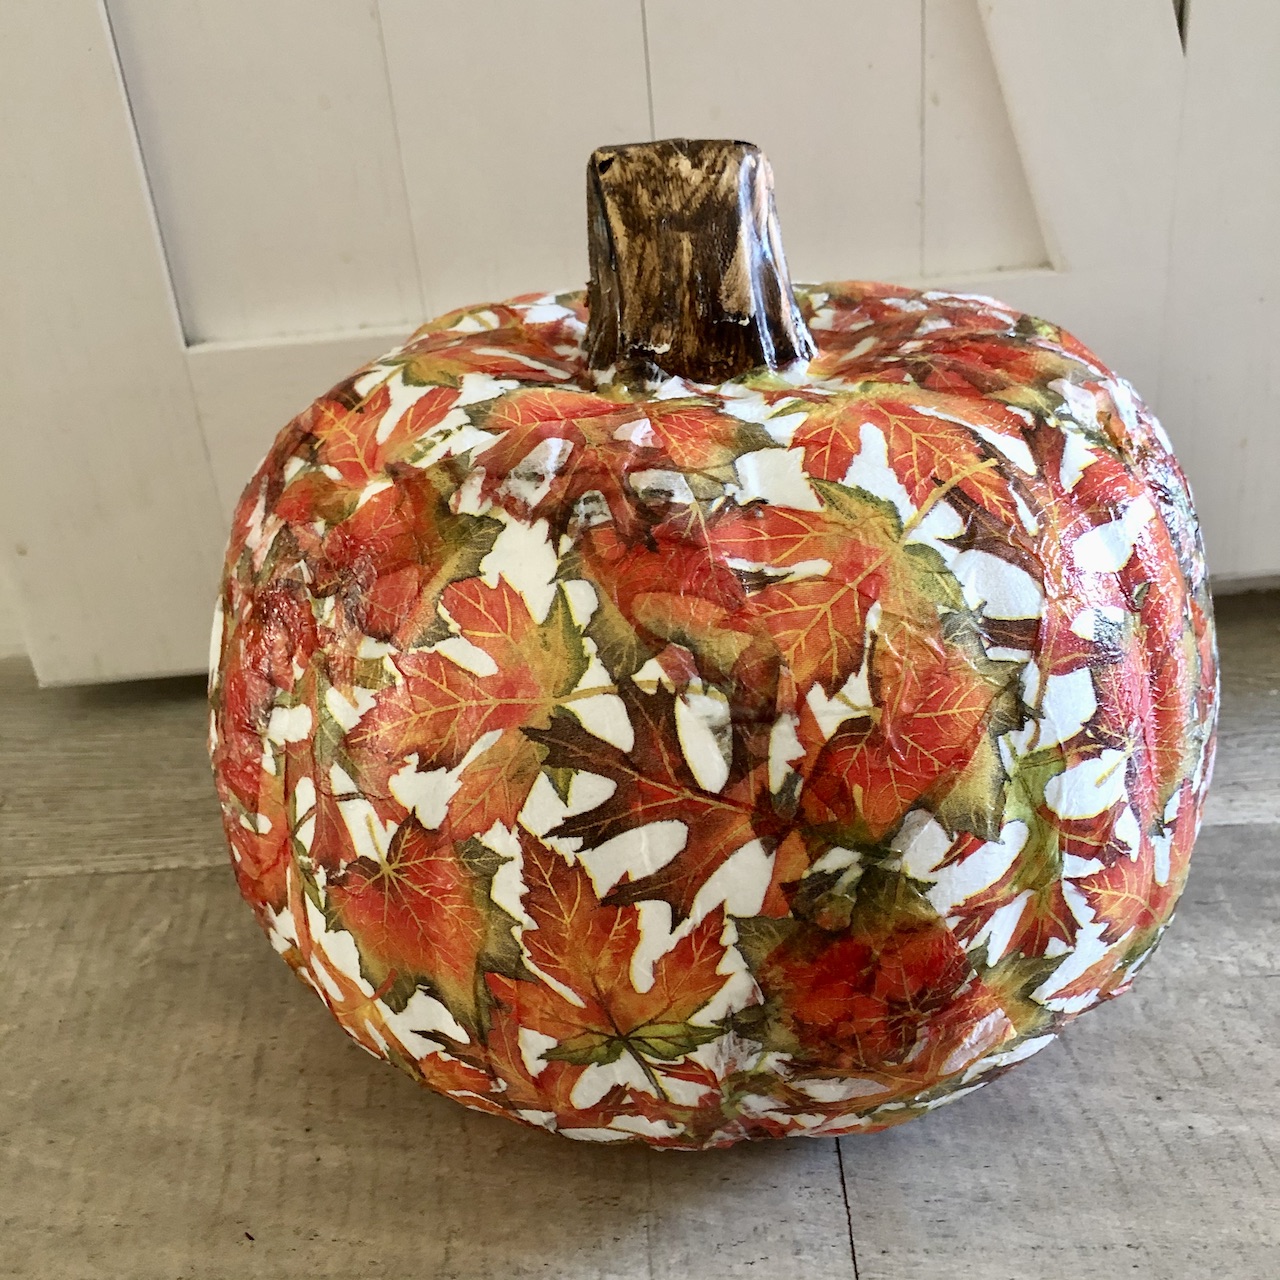 Pumpkin Craft with Decoupage Napkins - MY 100 YEAR OLD HOME